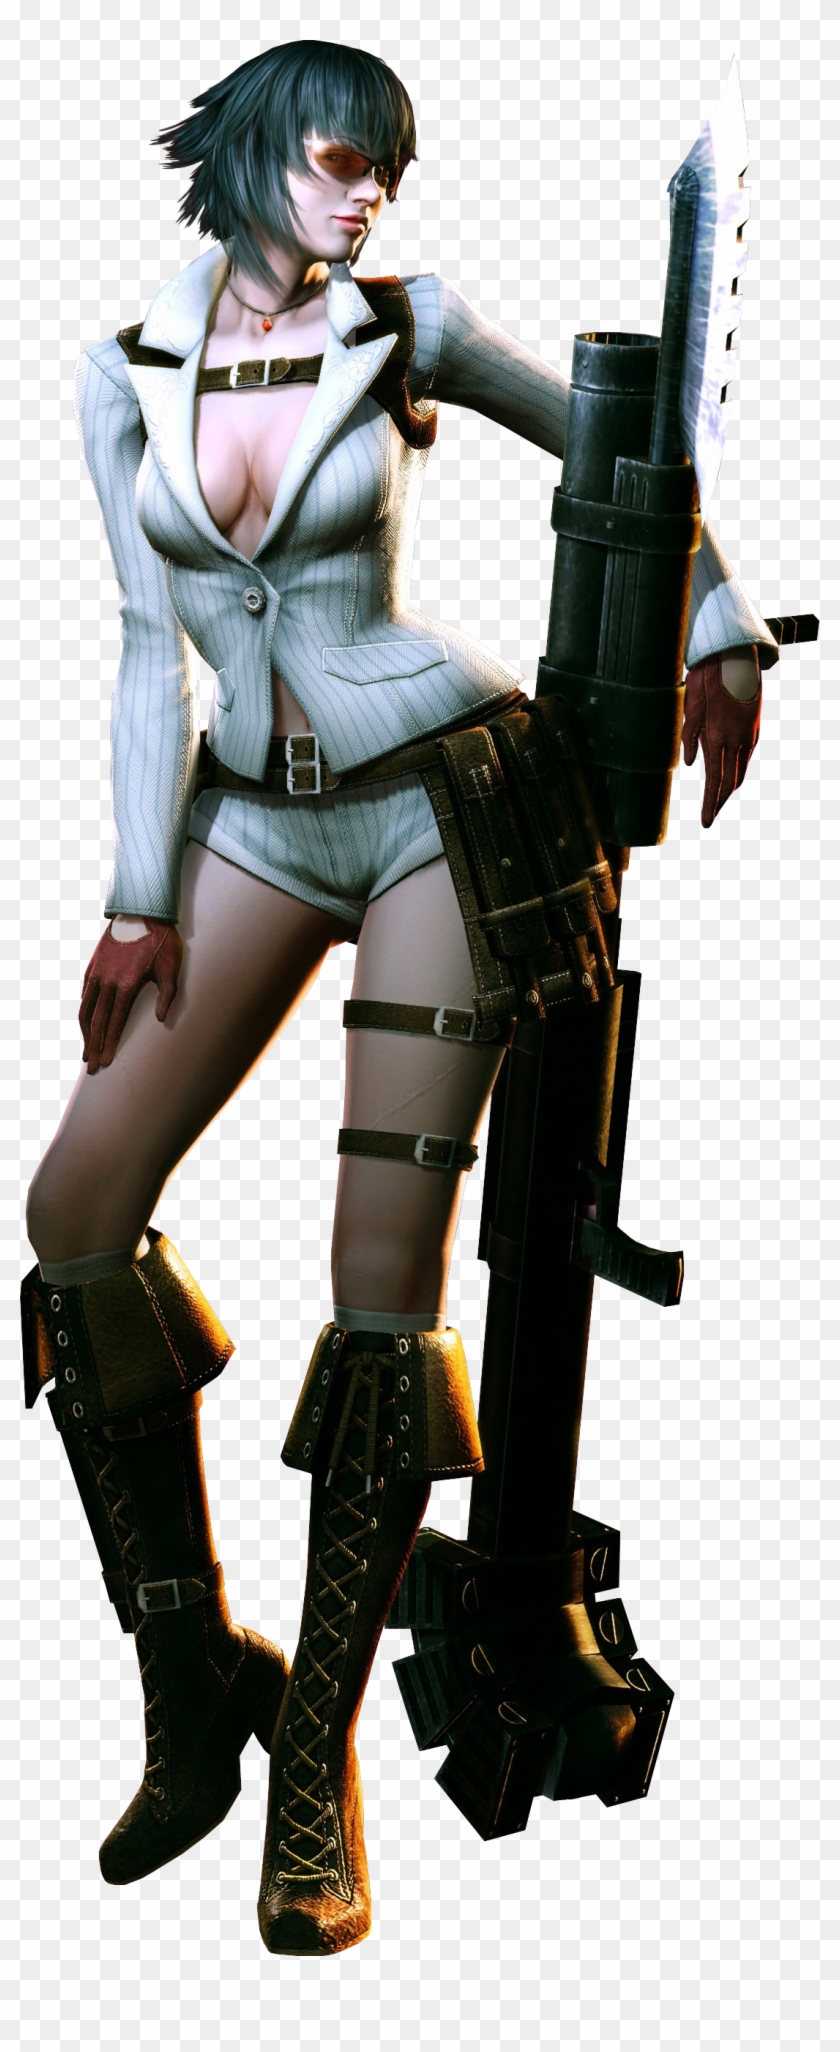 Dmc4 - Lady From Devil May Cry #285298